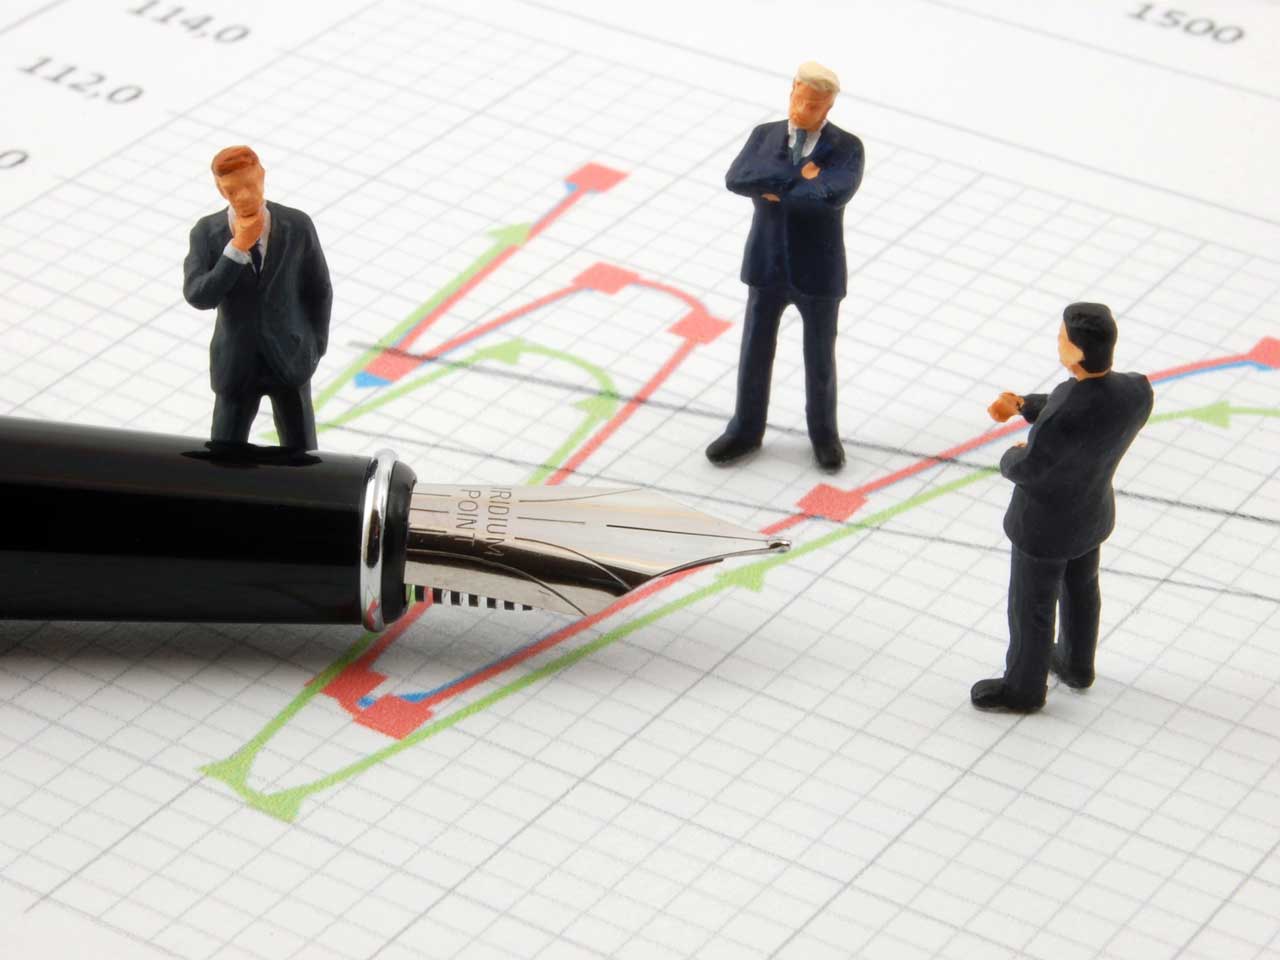 Figurines of stockbrokers looking at a stocks and shares graph